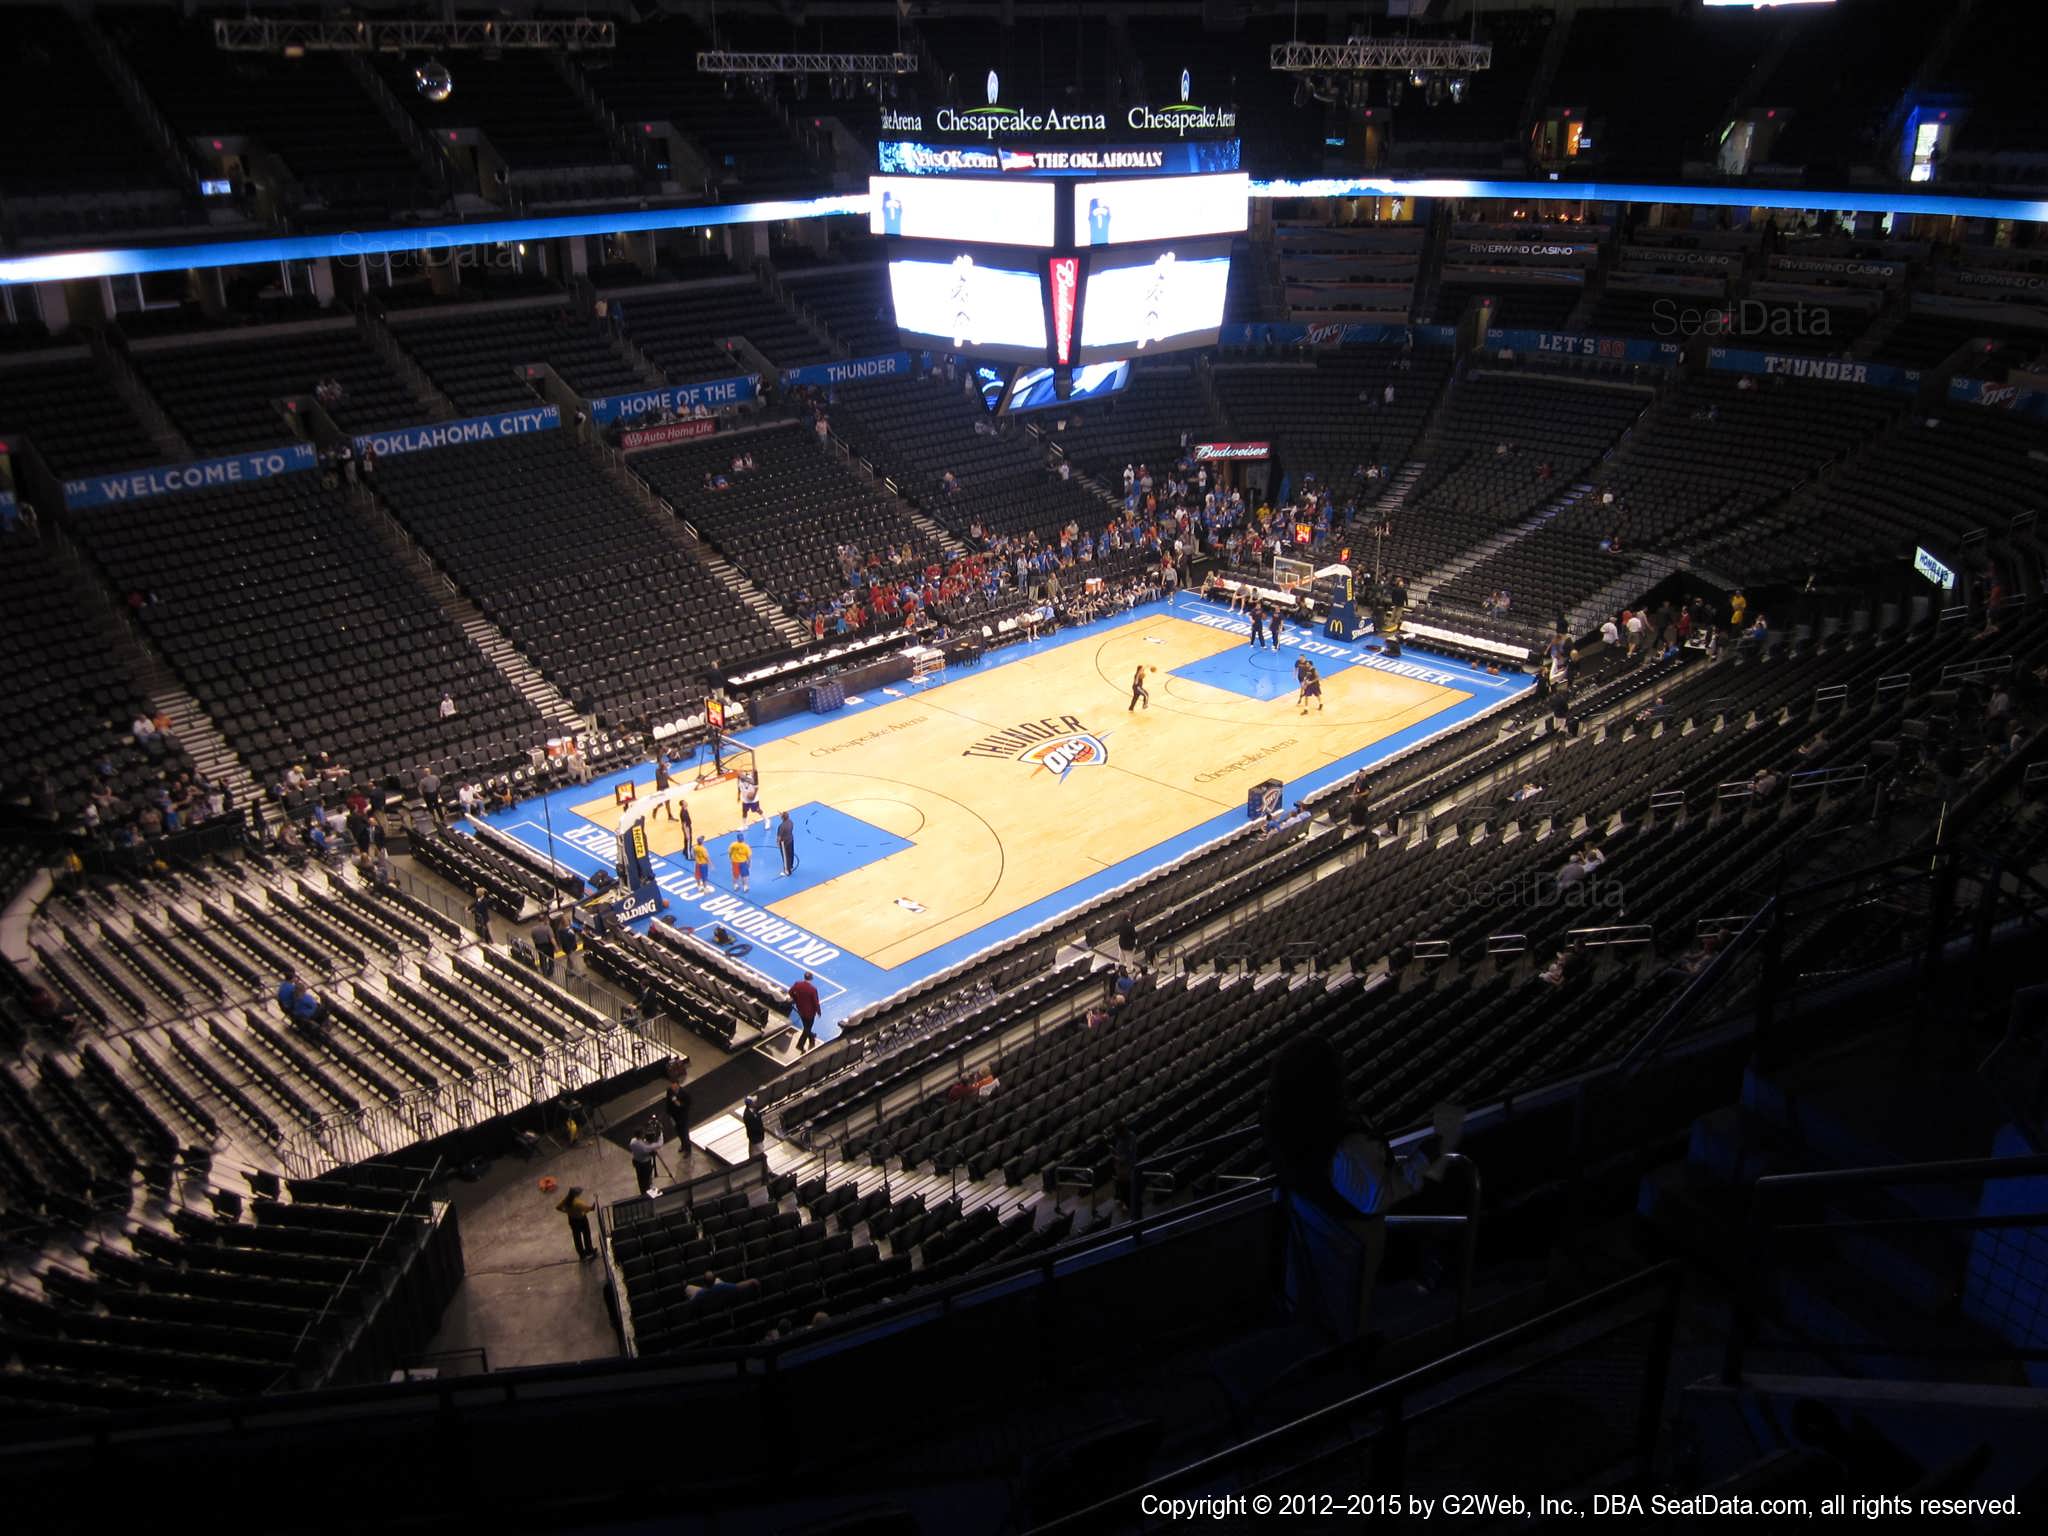 Seat view from section 312 at Chesapeake Energy Arena, home of the Oklahoma City Thunder